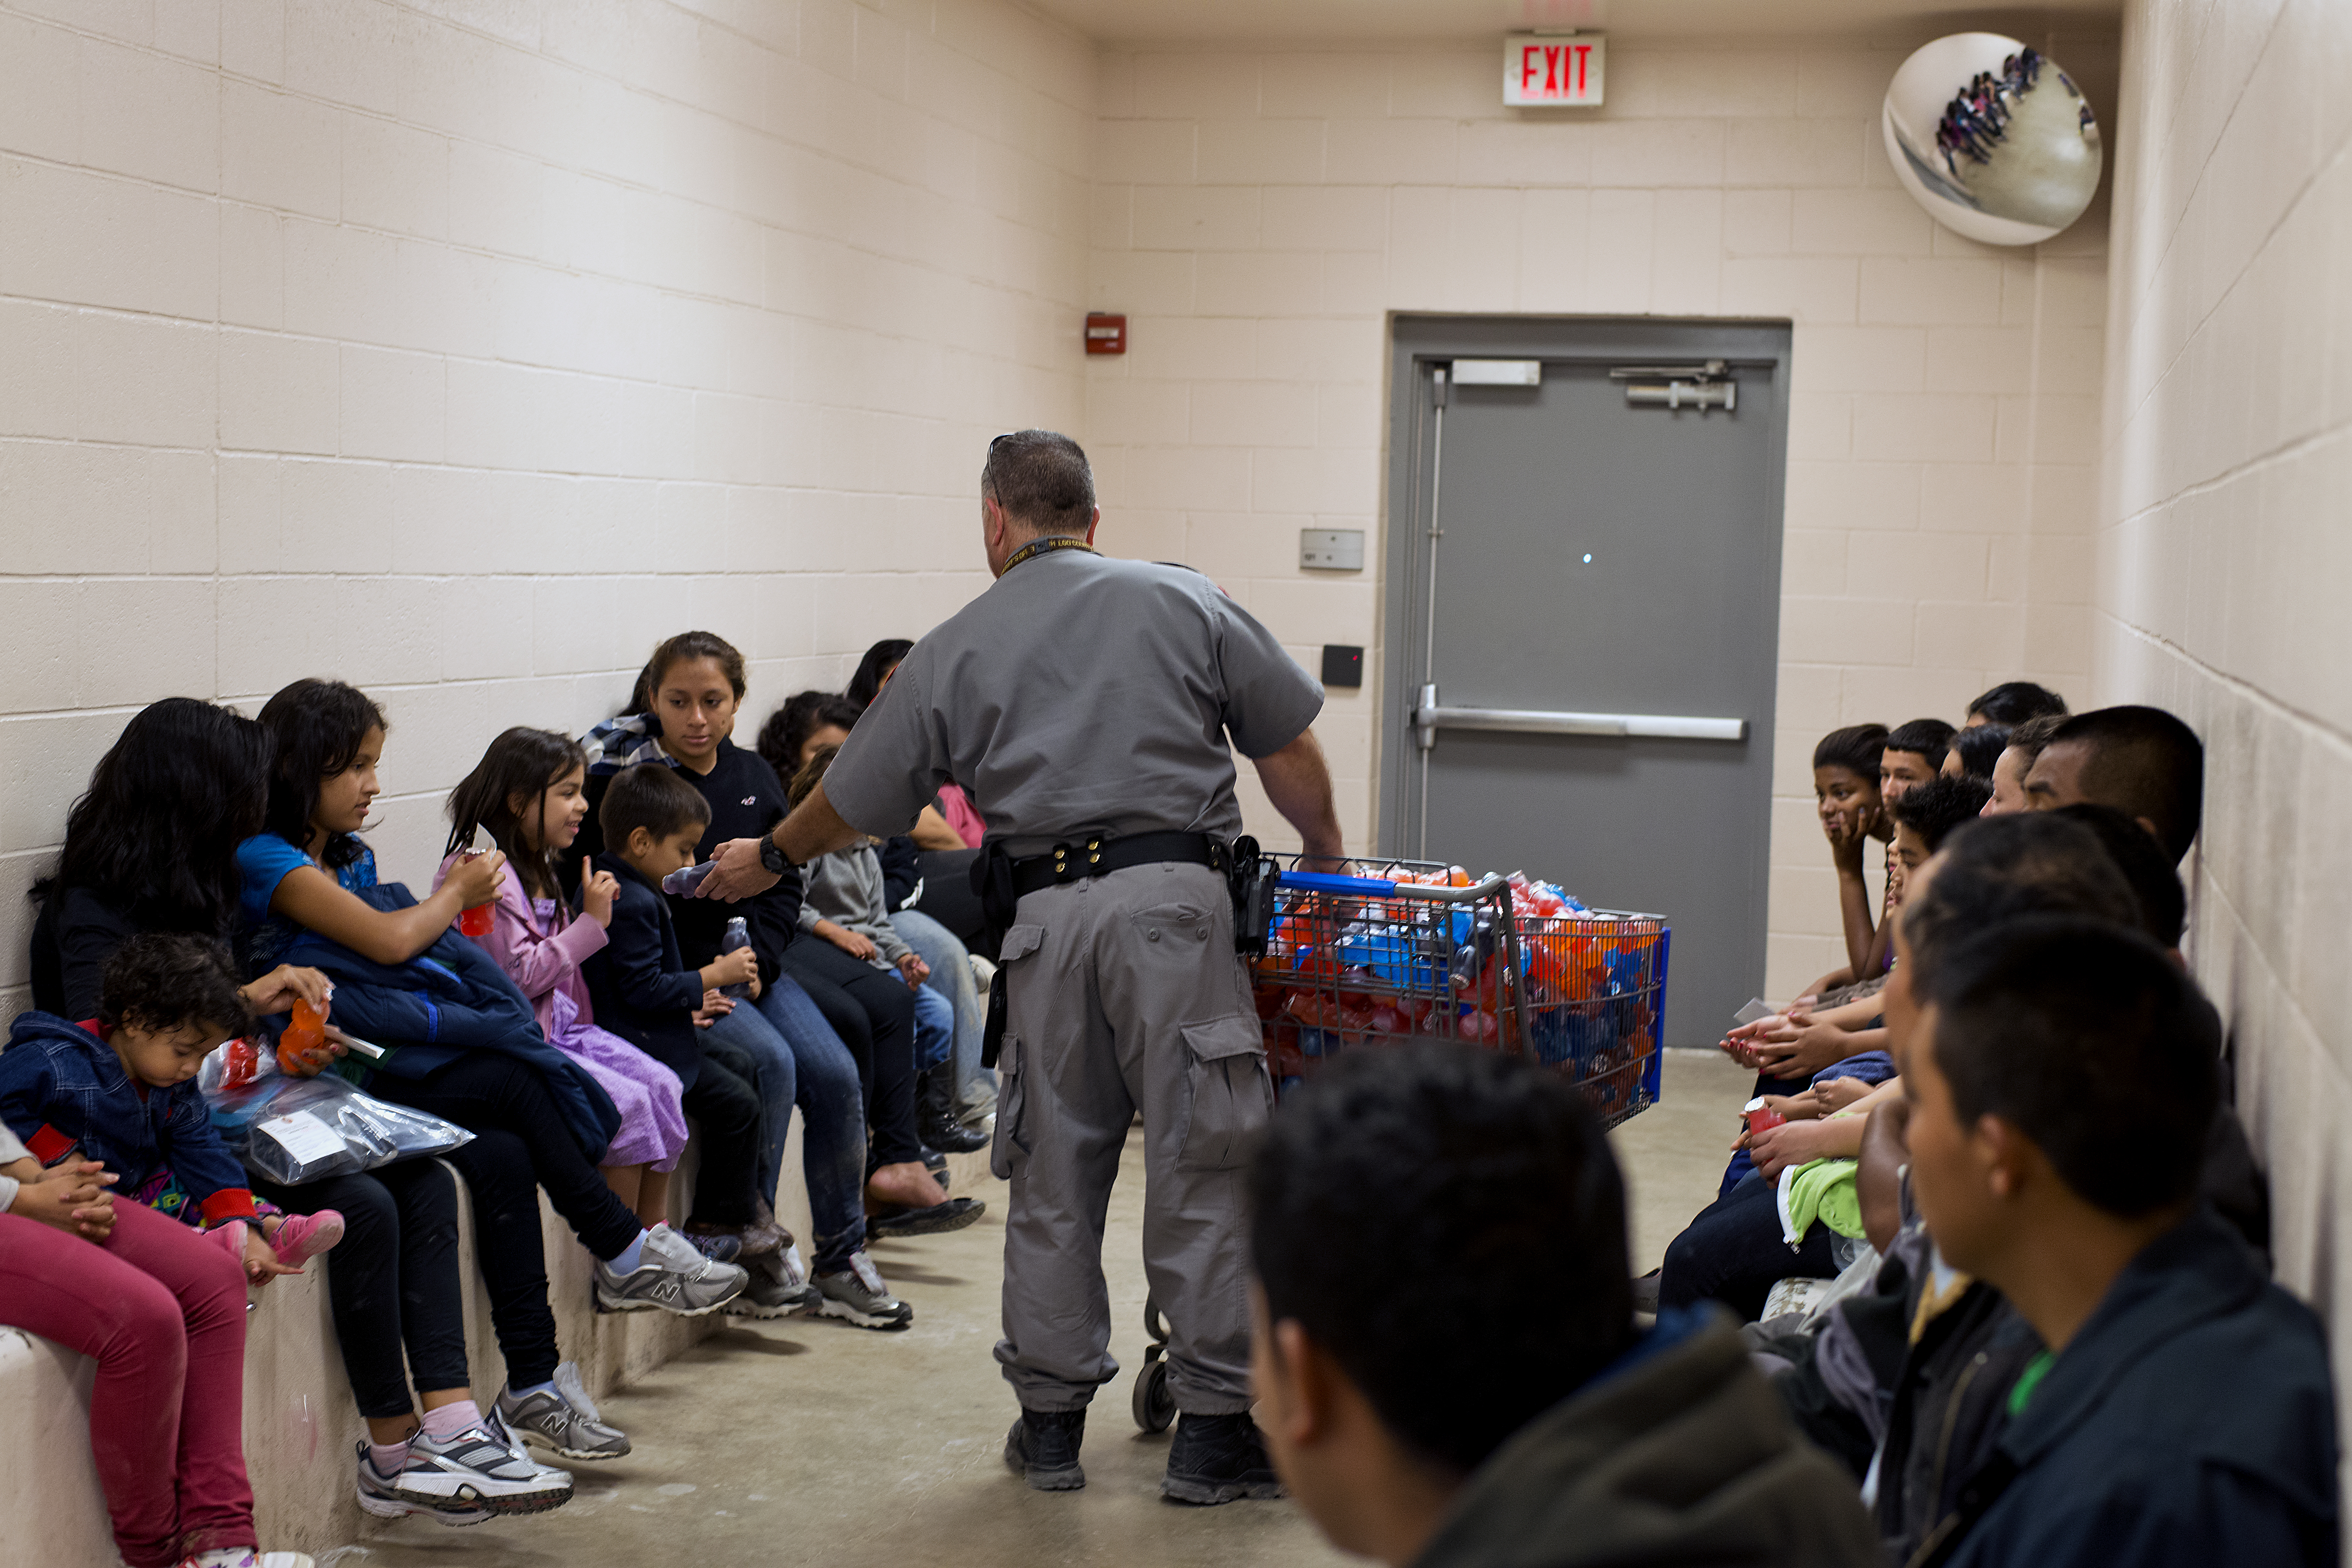 An officer distributes juice at McAllen, Texas Border Patrol facility. (Photo by Hector Silva)